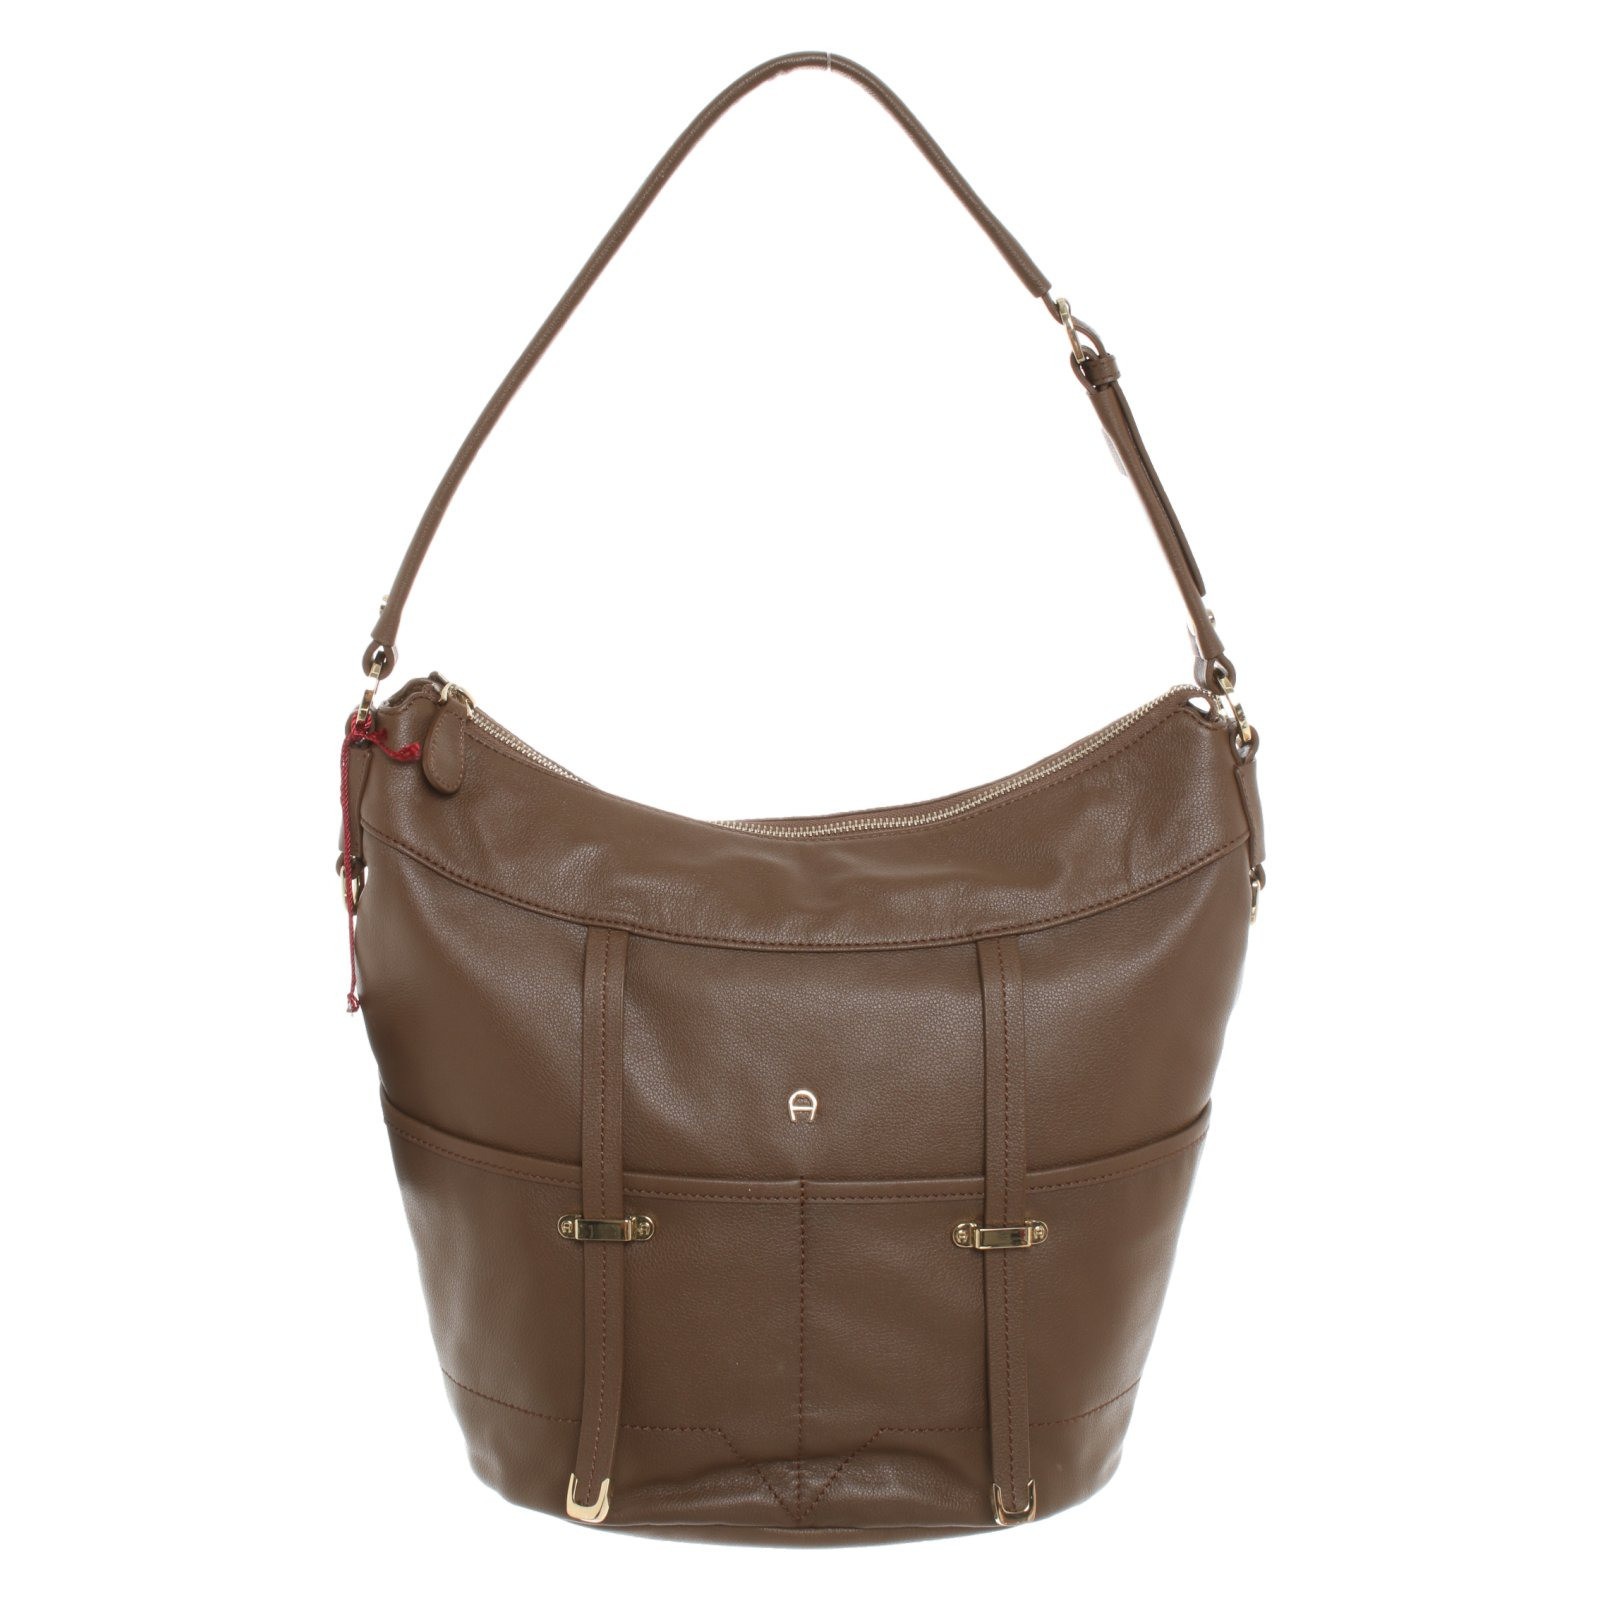 Aigner Handbag Leather in Brown - Second Hand Aigner Handbag Leather in  Brown buy used for 183€ (6953426)